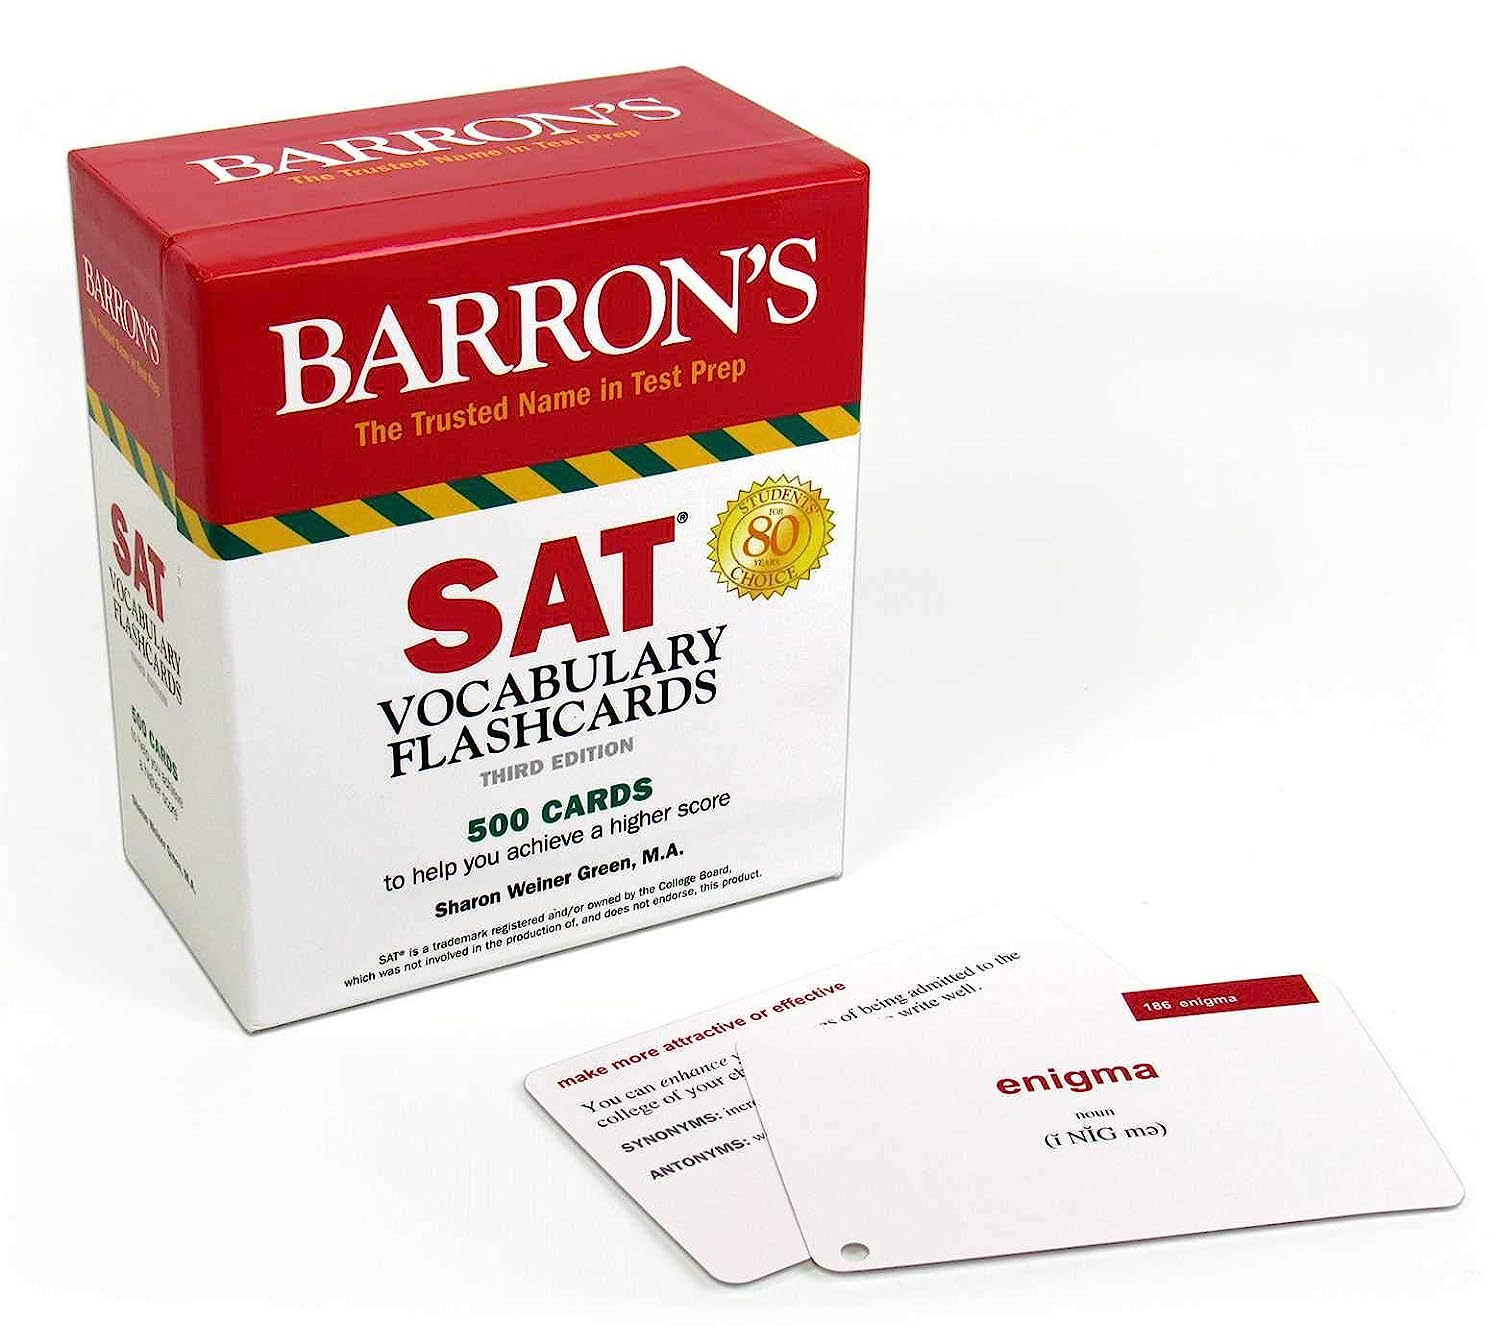 500-Cards SAT Vocabulary Flashcards: Reflecting the Most Frequently Tested SAT Words + Sorting Ring for Custom Study (Barron's Test Prep) $3.95